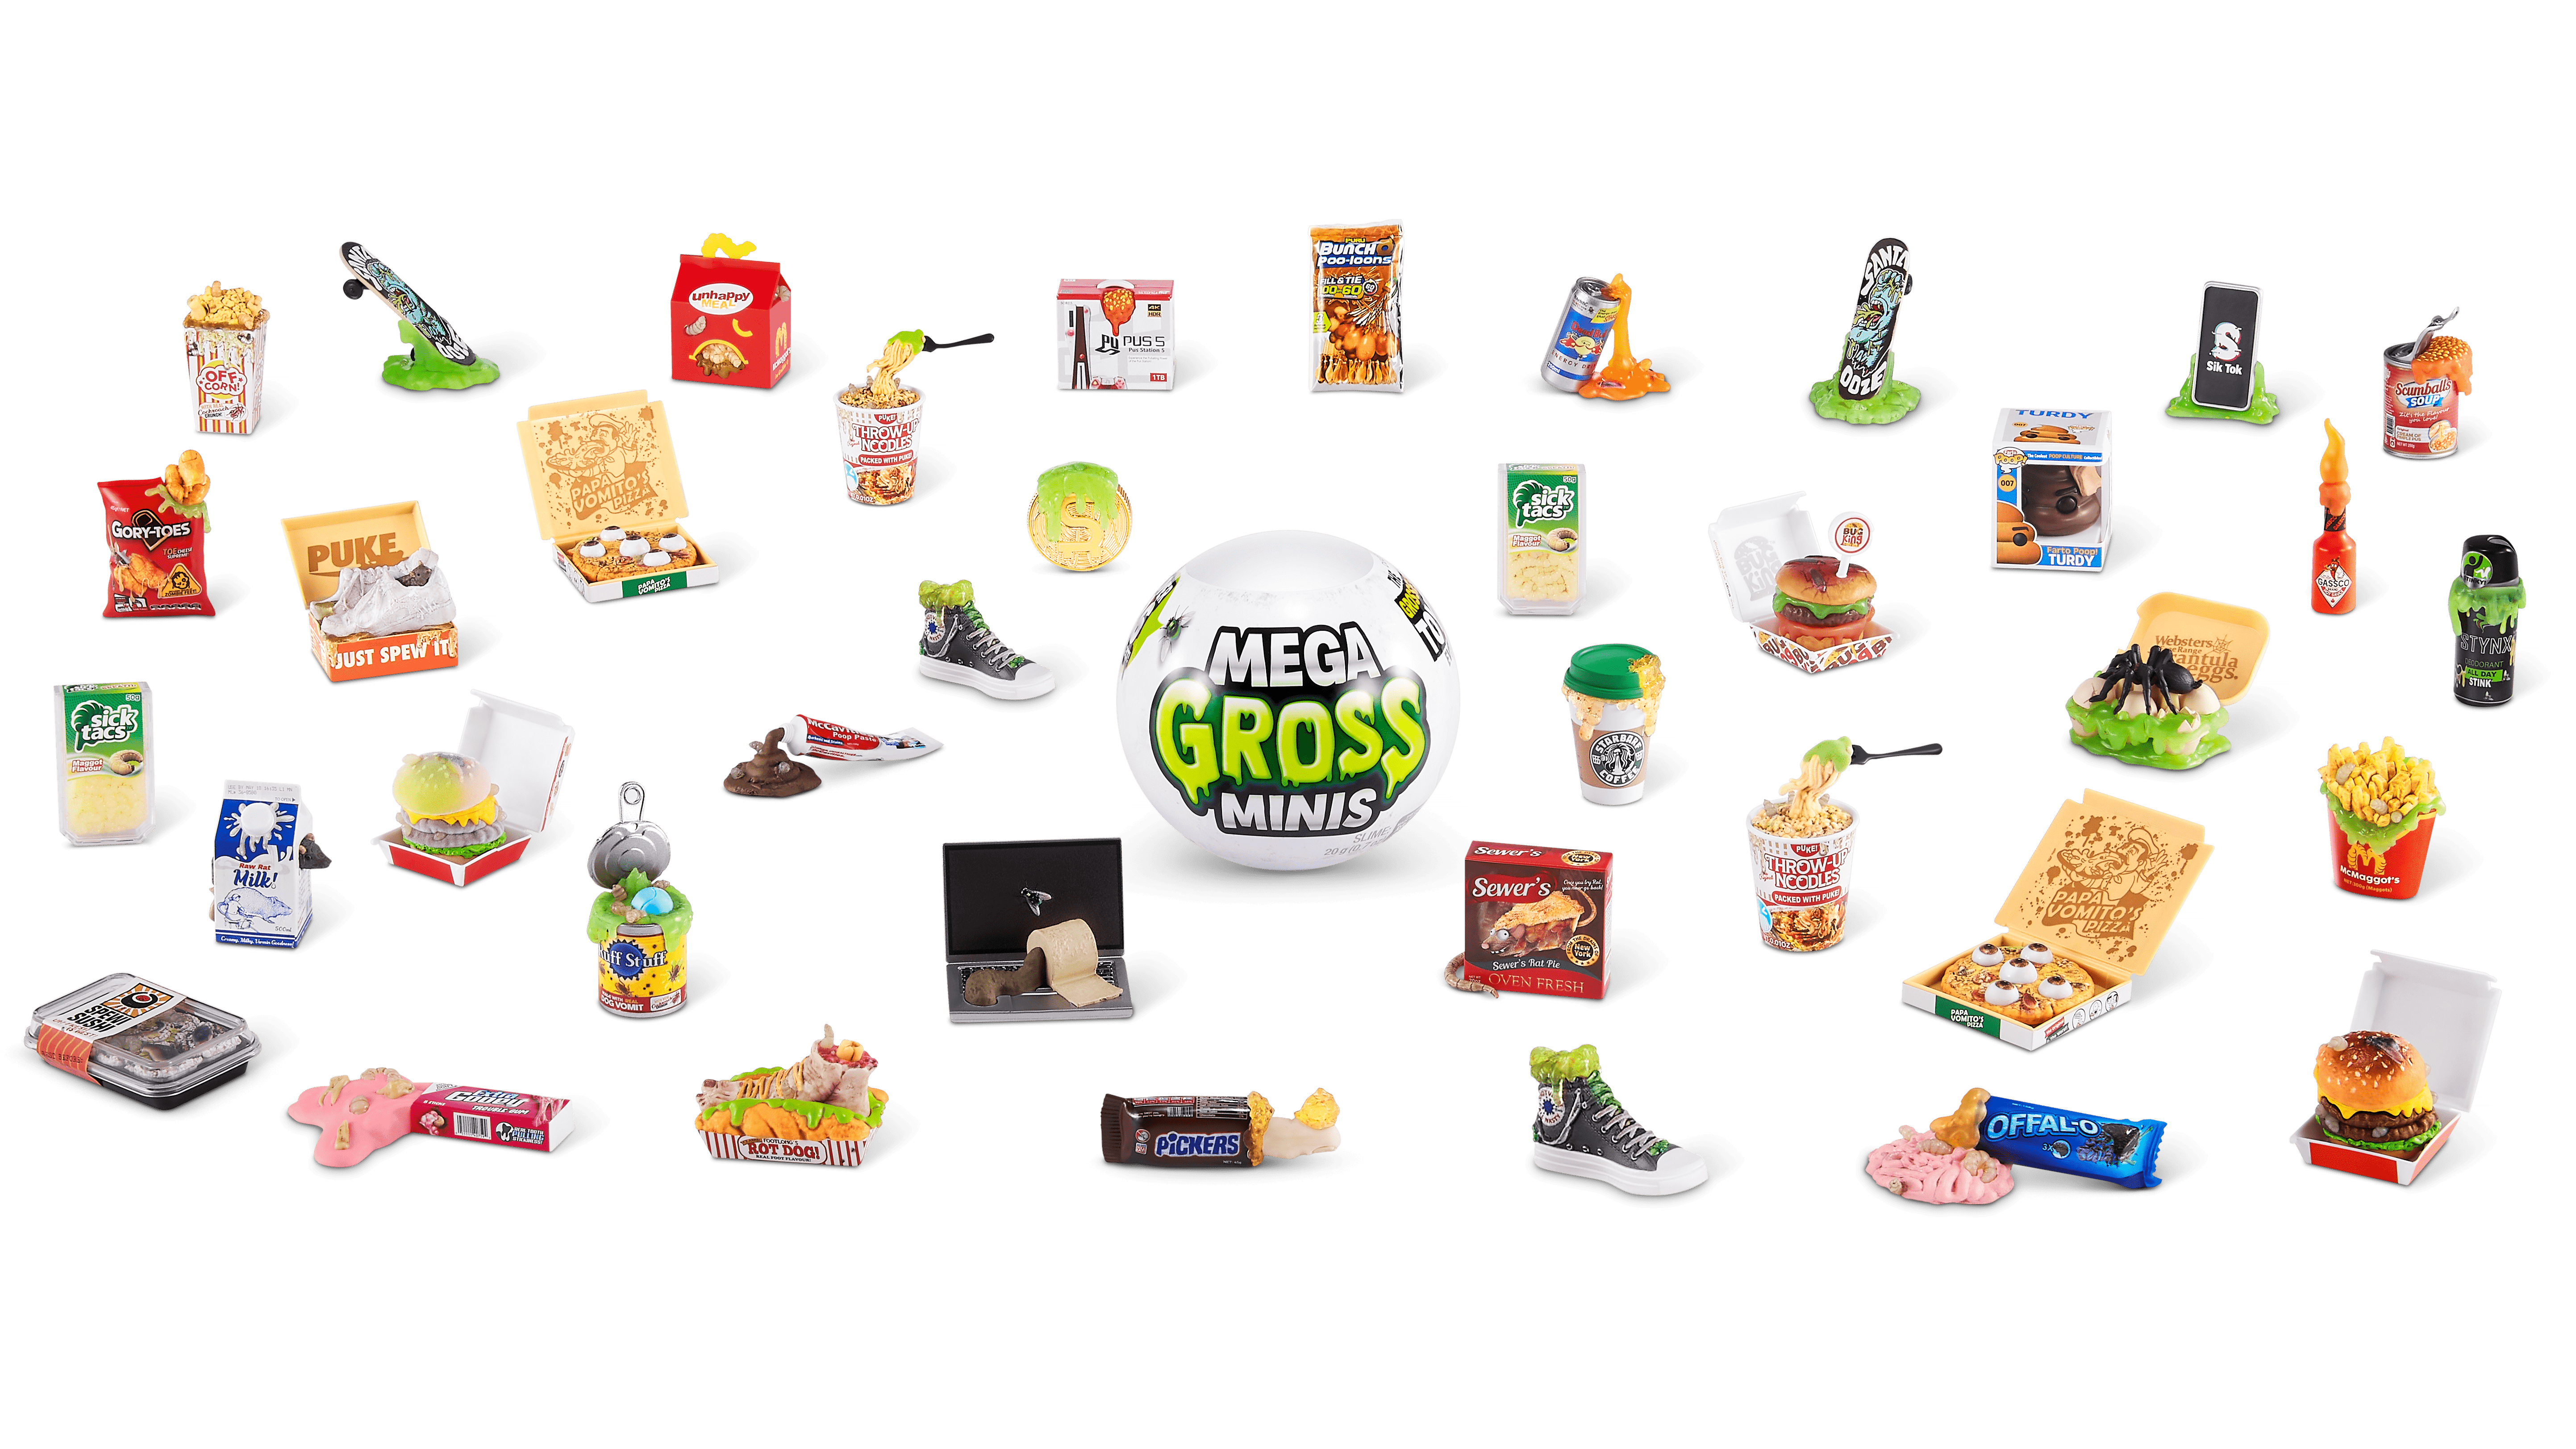 G is for Gross! It's time to get gross miniacs! @zuru.toys sent us